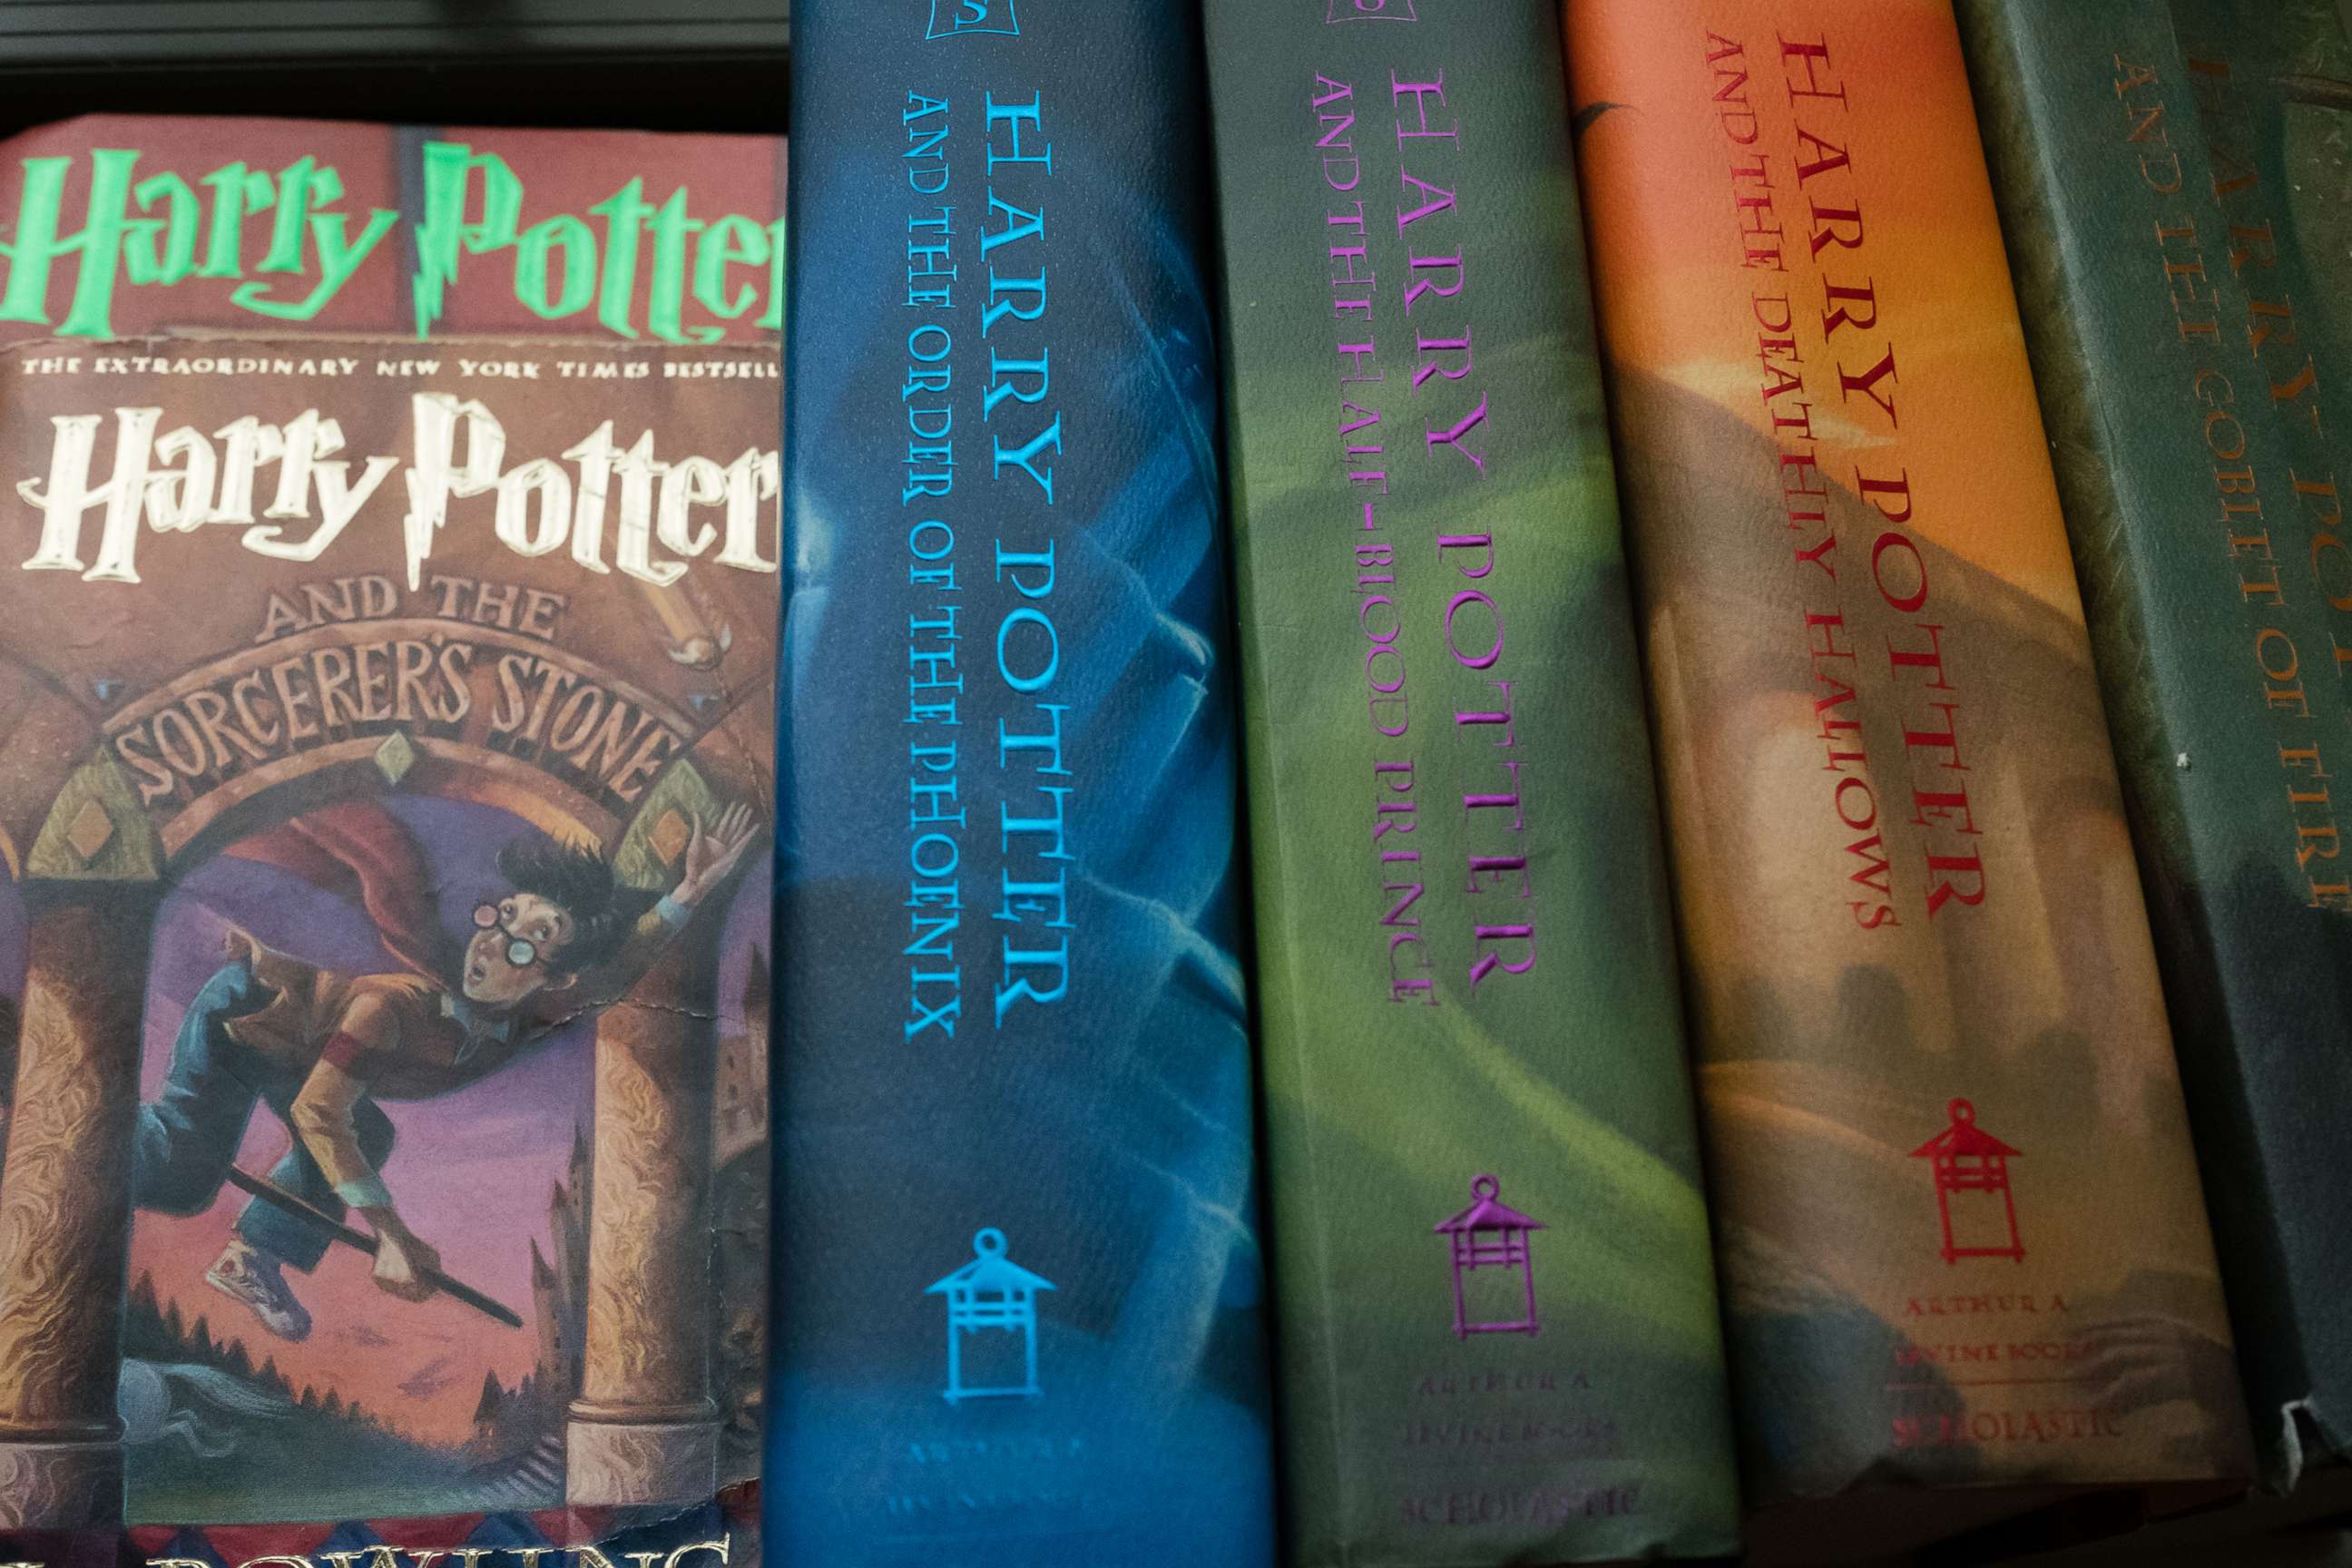 PHOTO: In this June 19, 2017, file photo, a collection of Harry Potter books is shown.